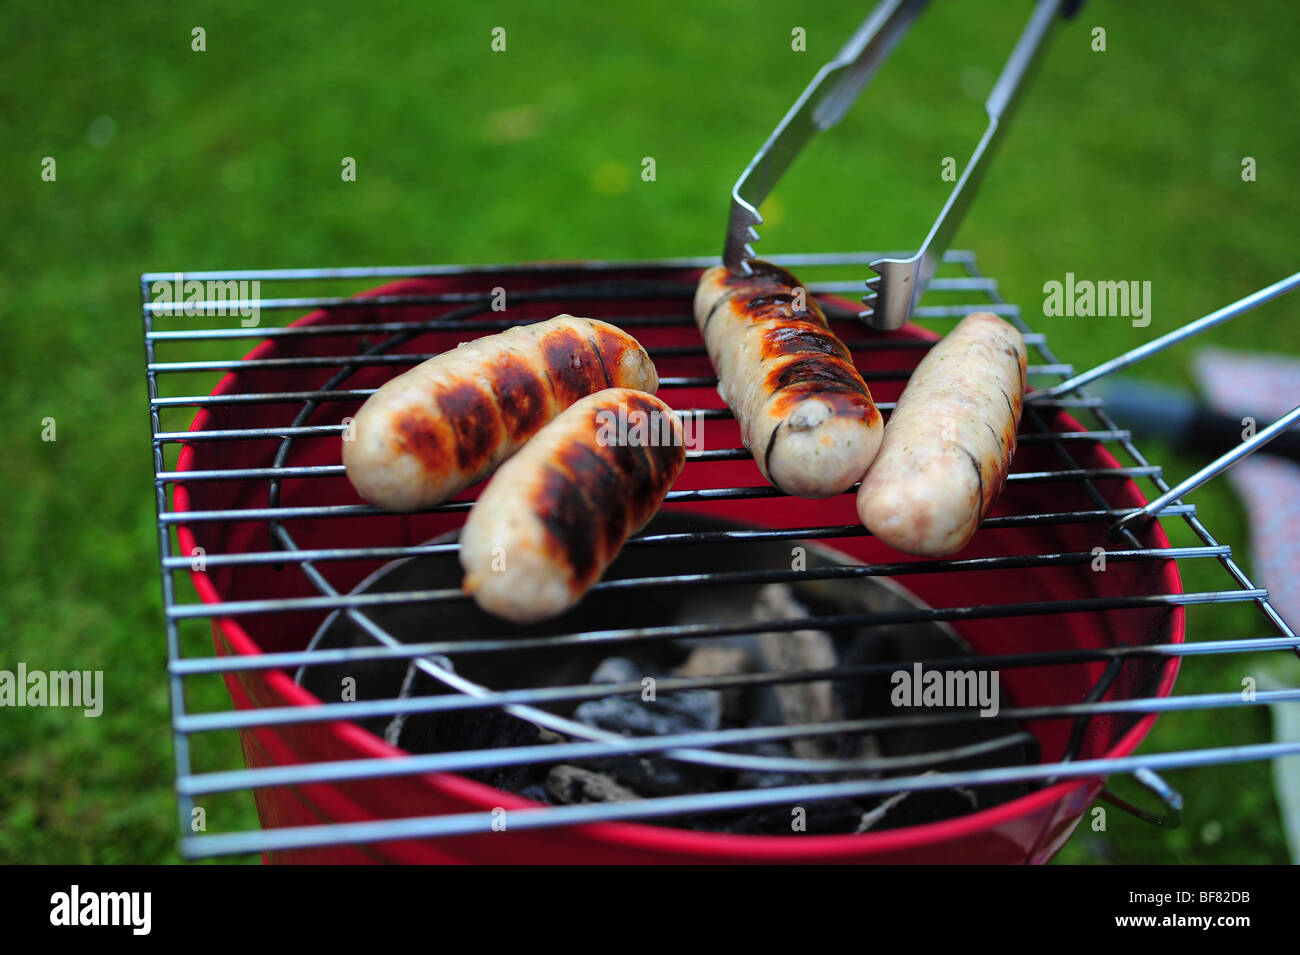 Sausages cooking on a barbeque BBQ in a garden in Devon, UK Stock Photo